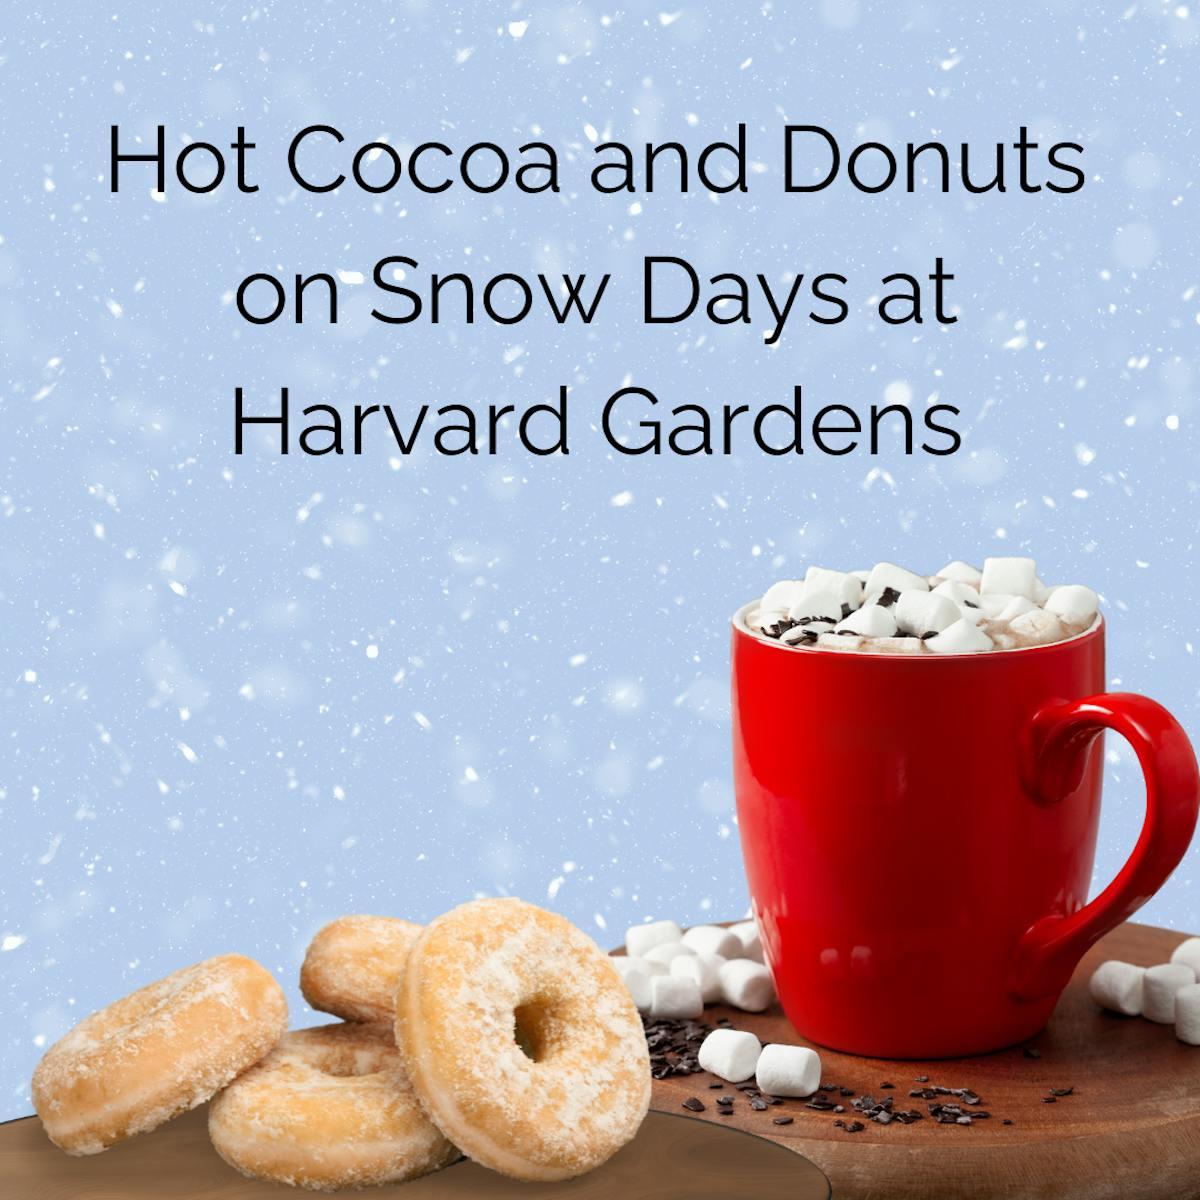 hot chocolate and donuts at harvard gardens on snow days